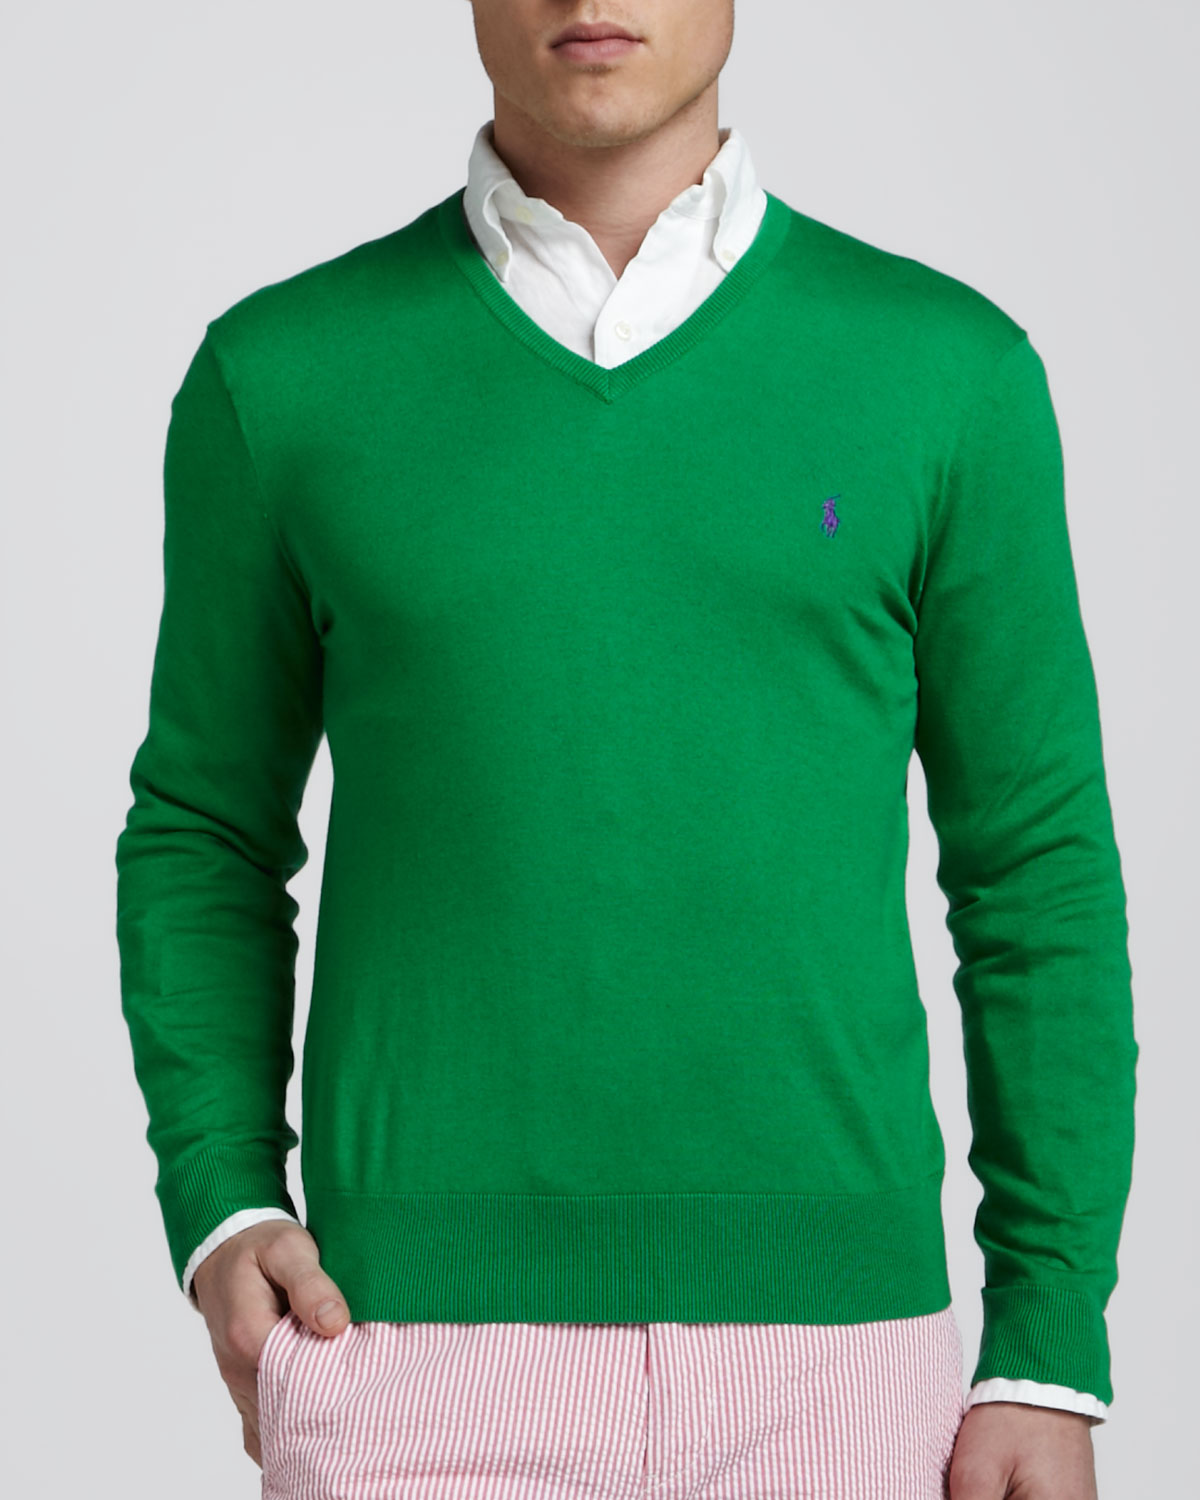 Lyst - Polo ralph lauren V-neck Cotton cashmere Sweater Crosby Green in ...